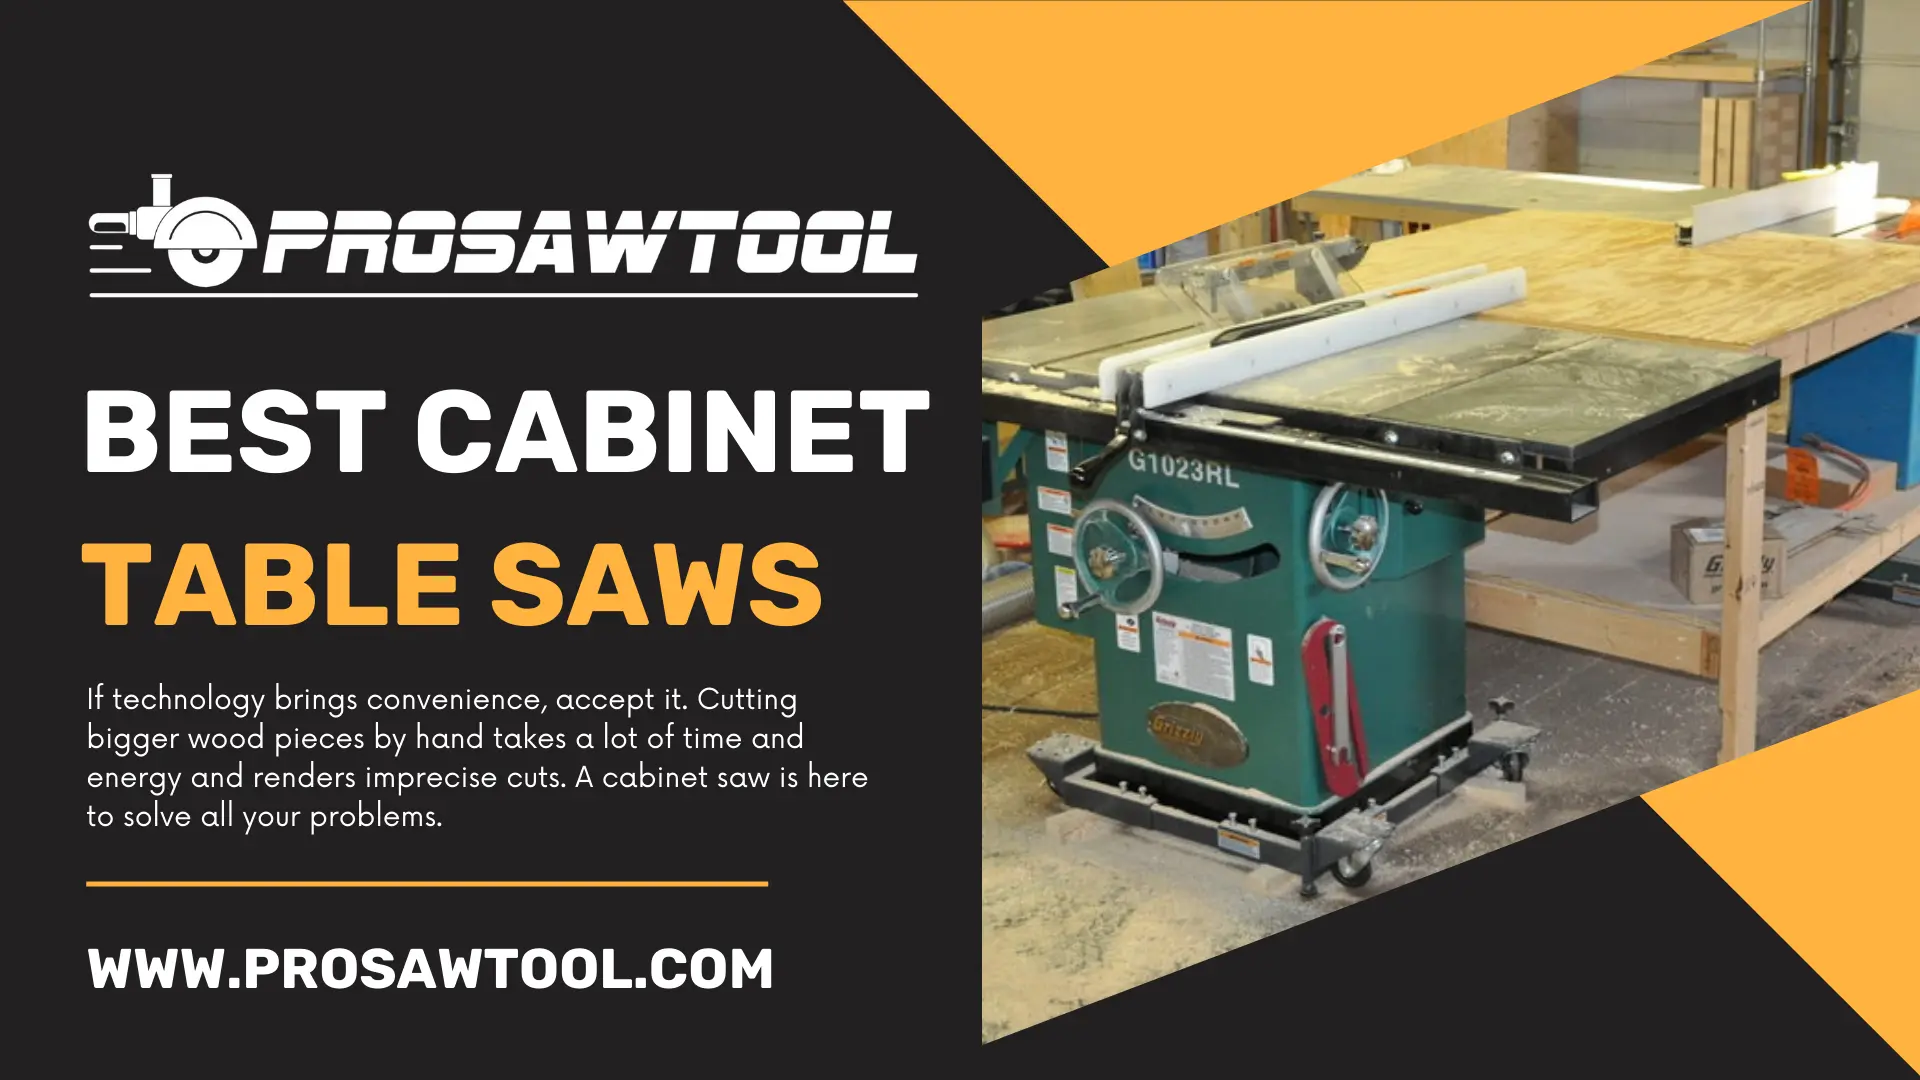 Best Cabinet Table Saws